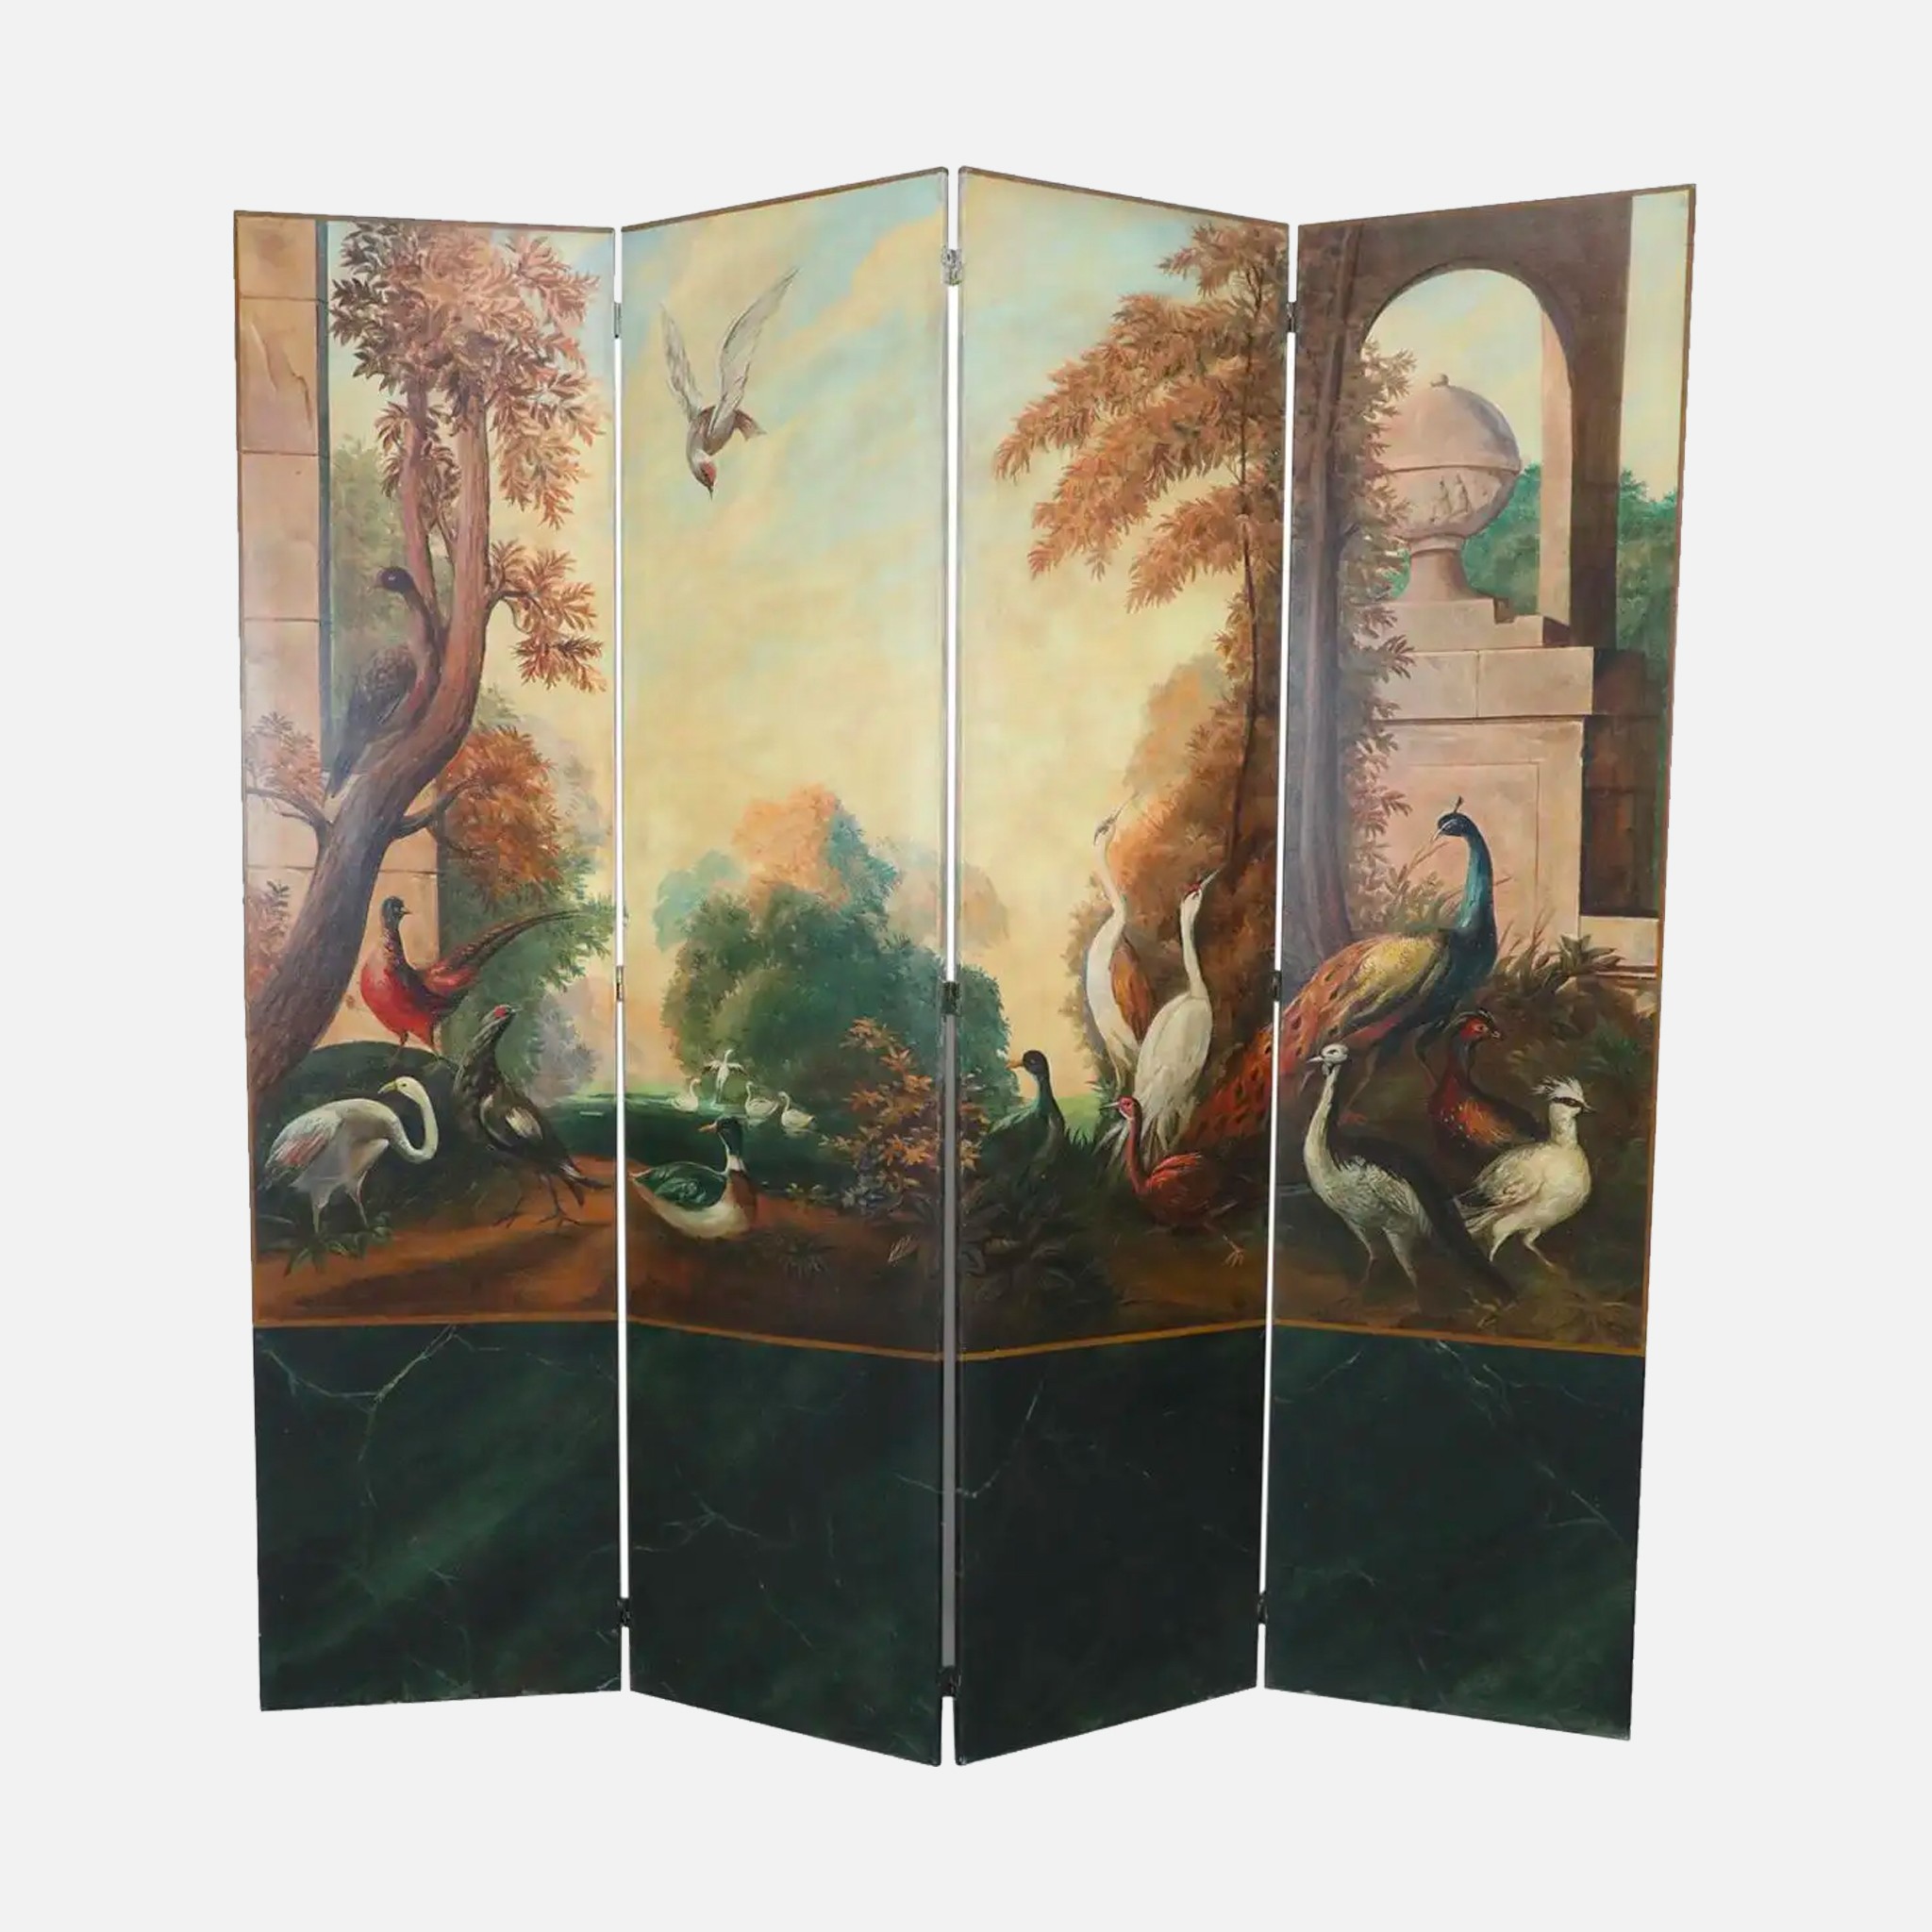 The image of an Early 20th-Century Italian Hand Painted Screen product